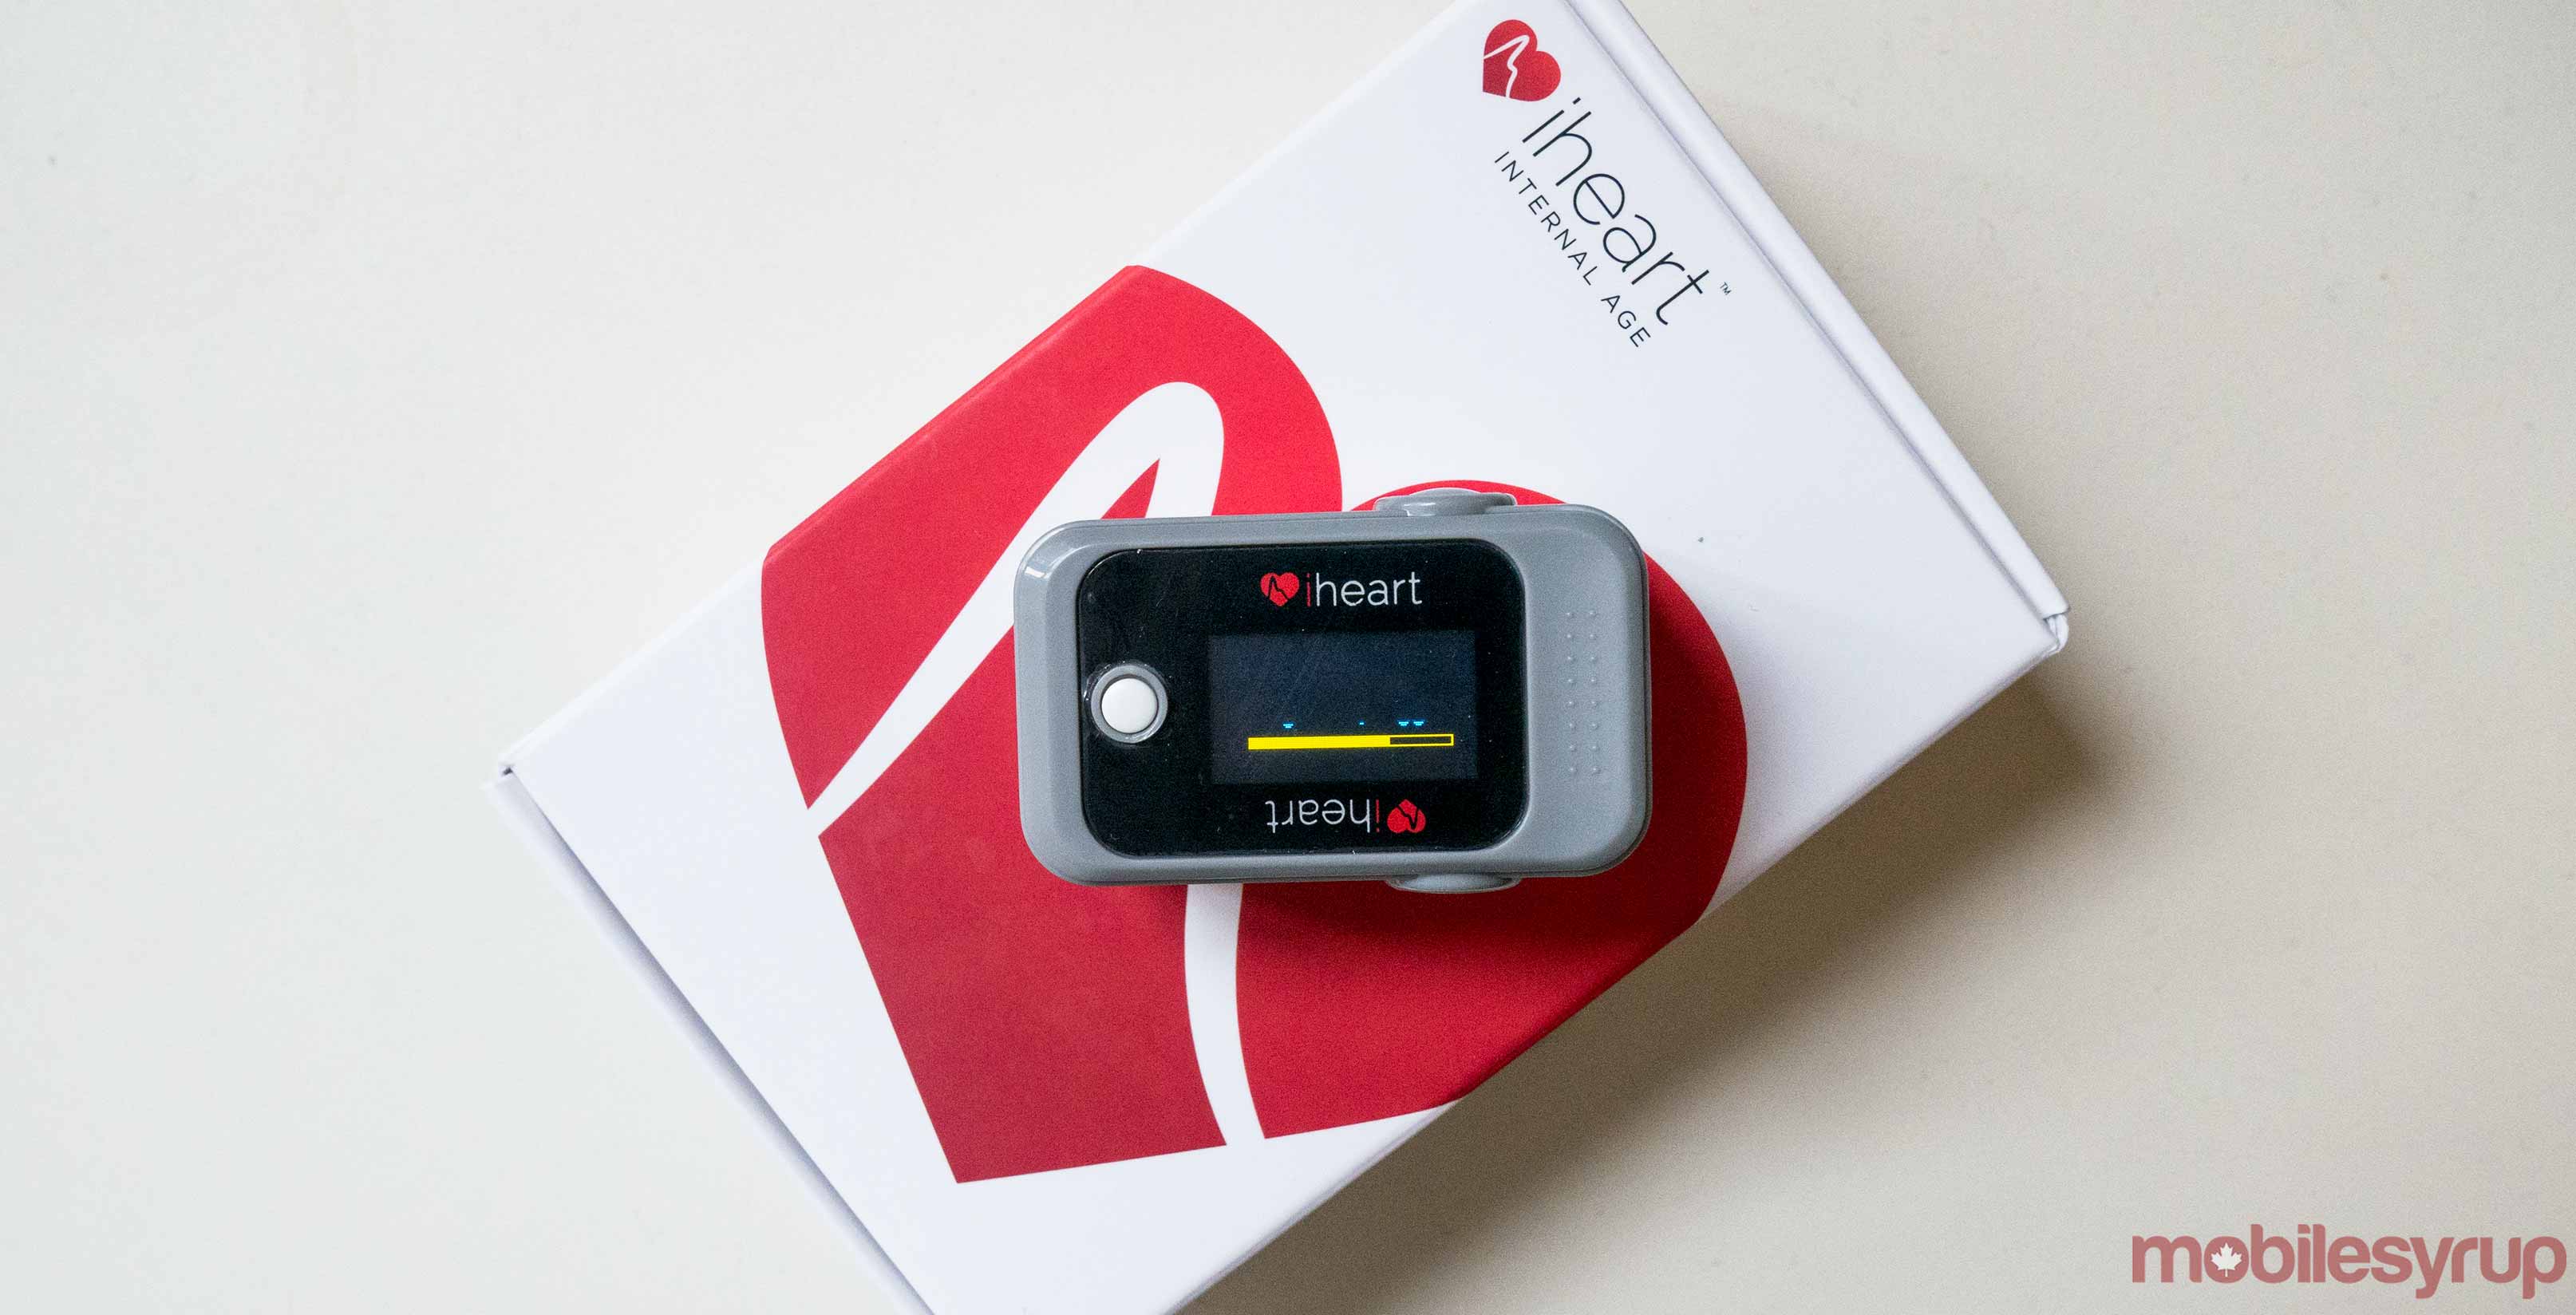 An image showing the iHeart monitor resting on its packaging